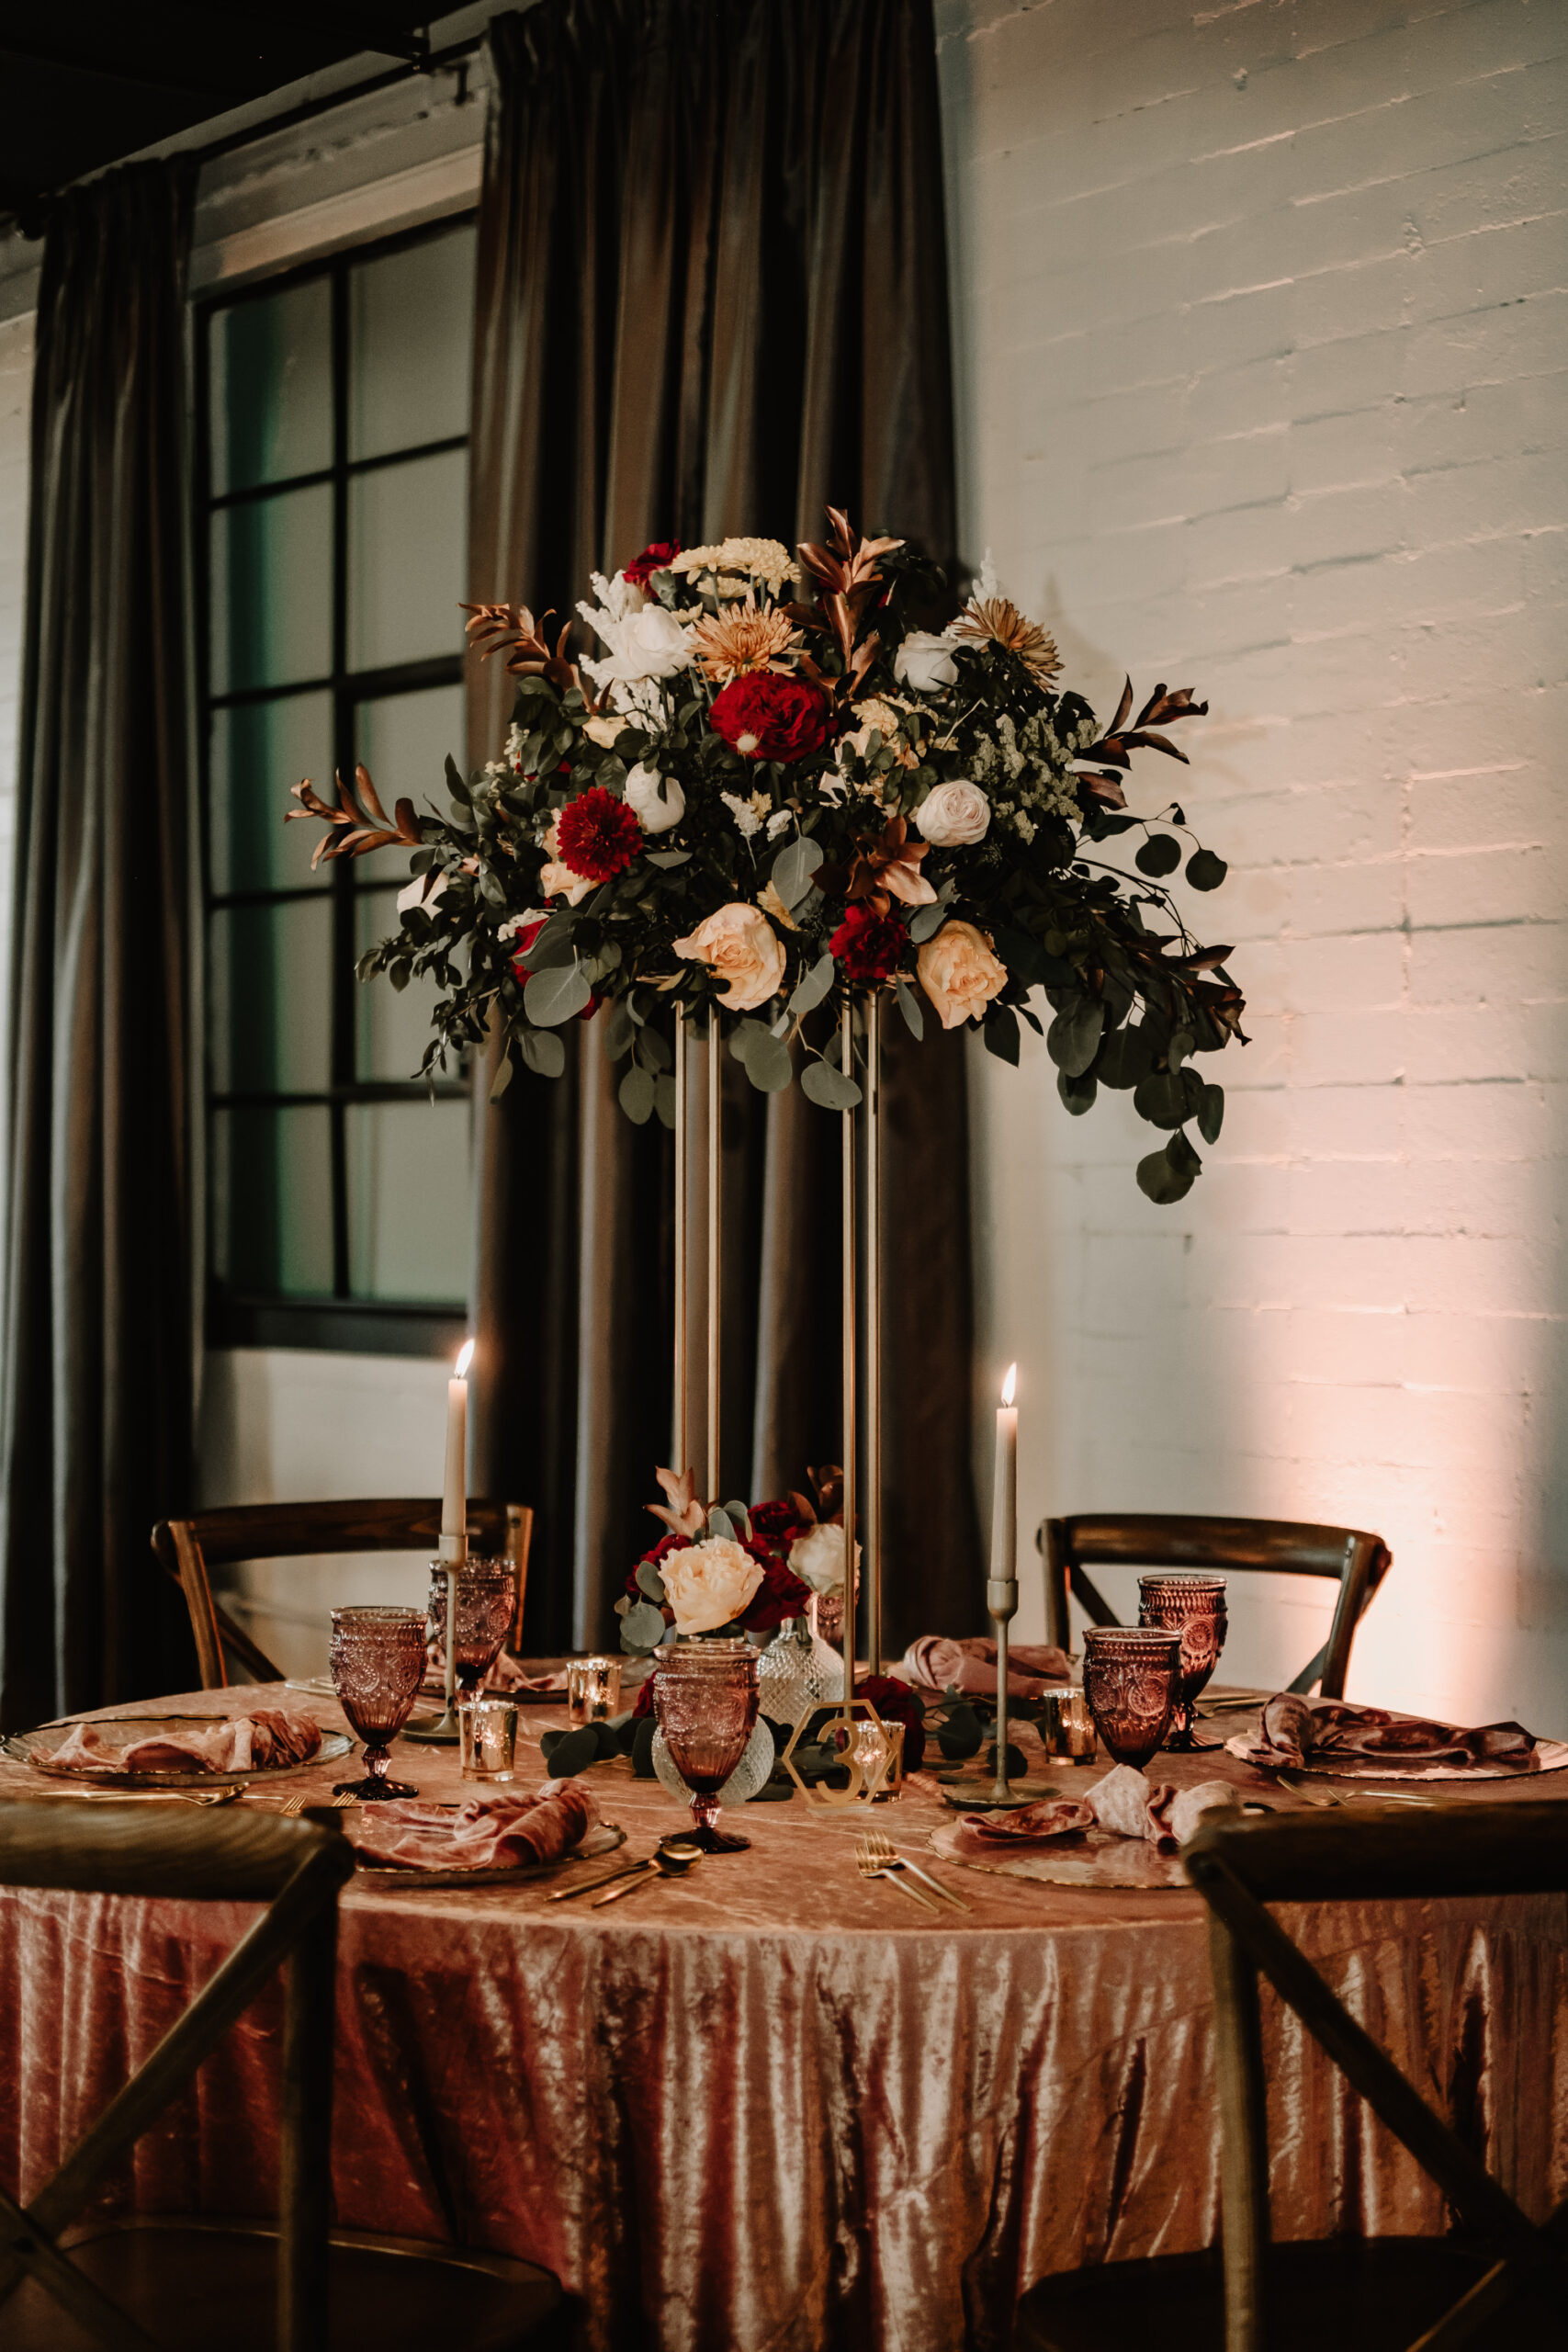 Tall Gold Metal Vase Centerpieces with Dark and Mood Fall Inspired Floral Arrangements with Dusty Rose Linens and Vintage Glasses | Fall Wedding Reception Table Ideas